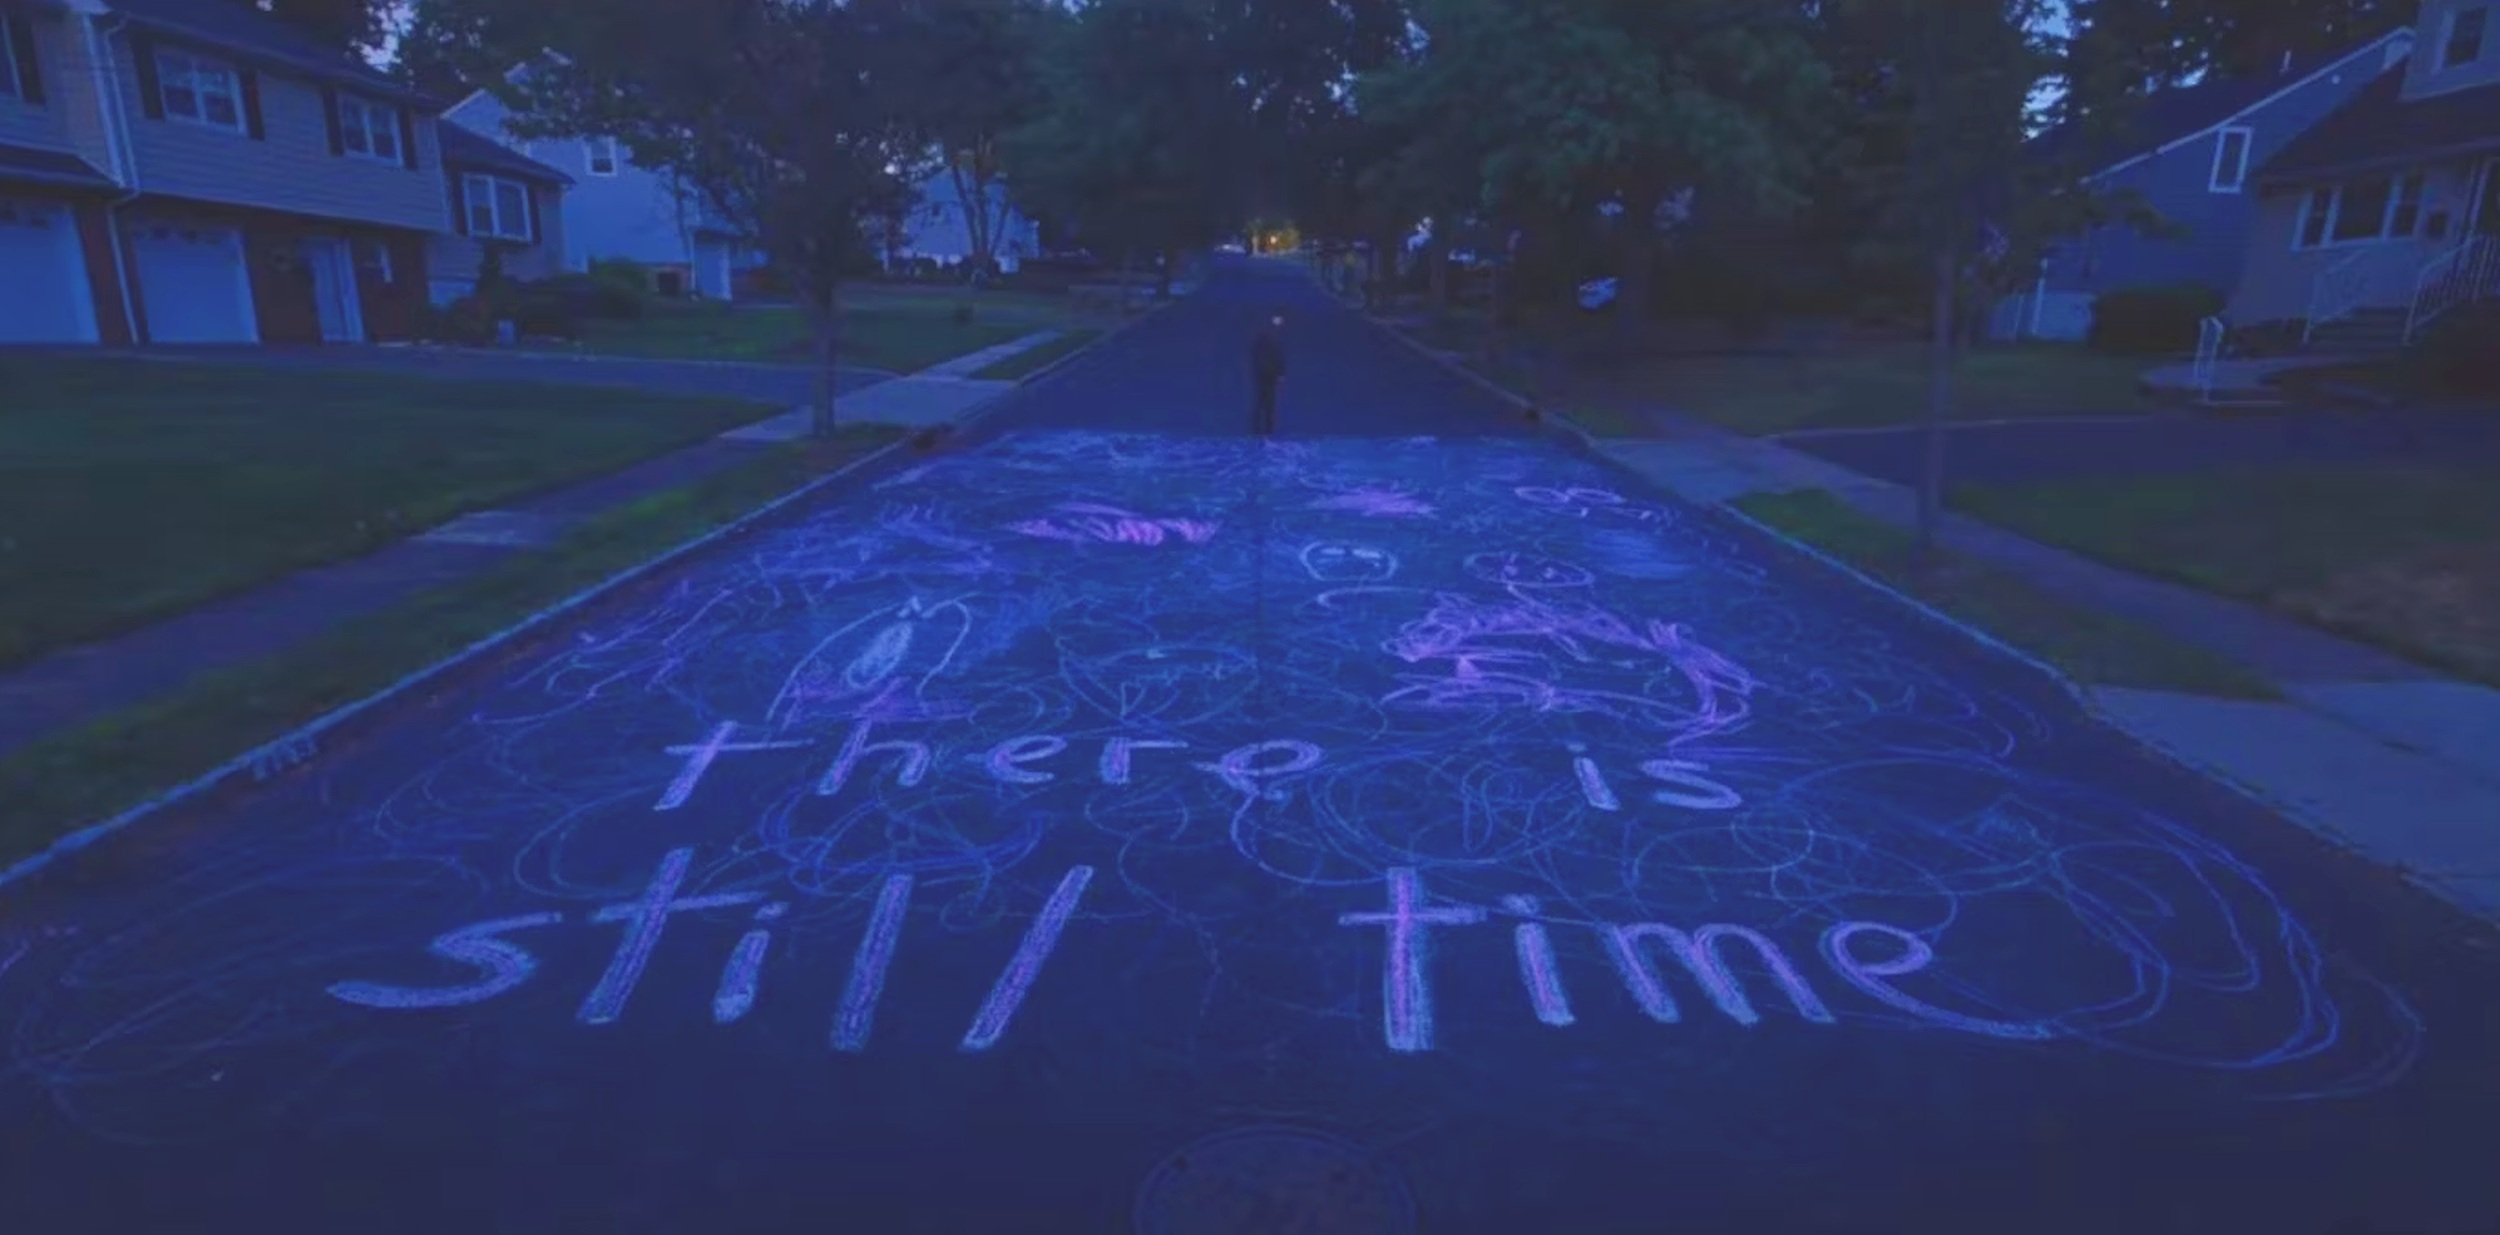 in chalk: "there is still time"